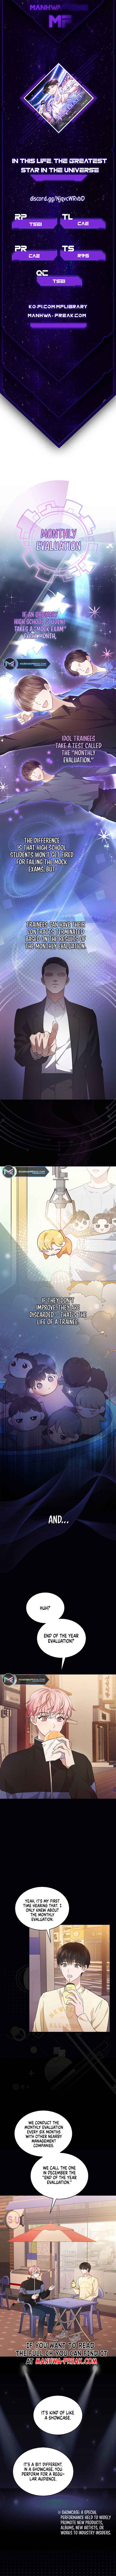 In This Life, the Greatest Star in the Universe chapter 5